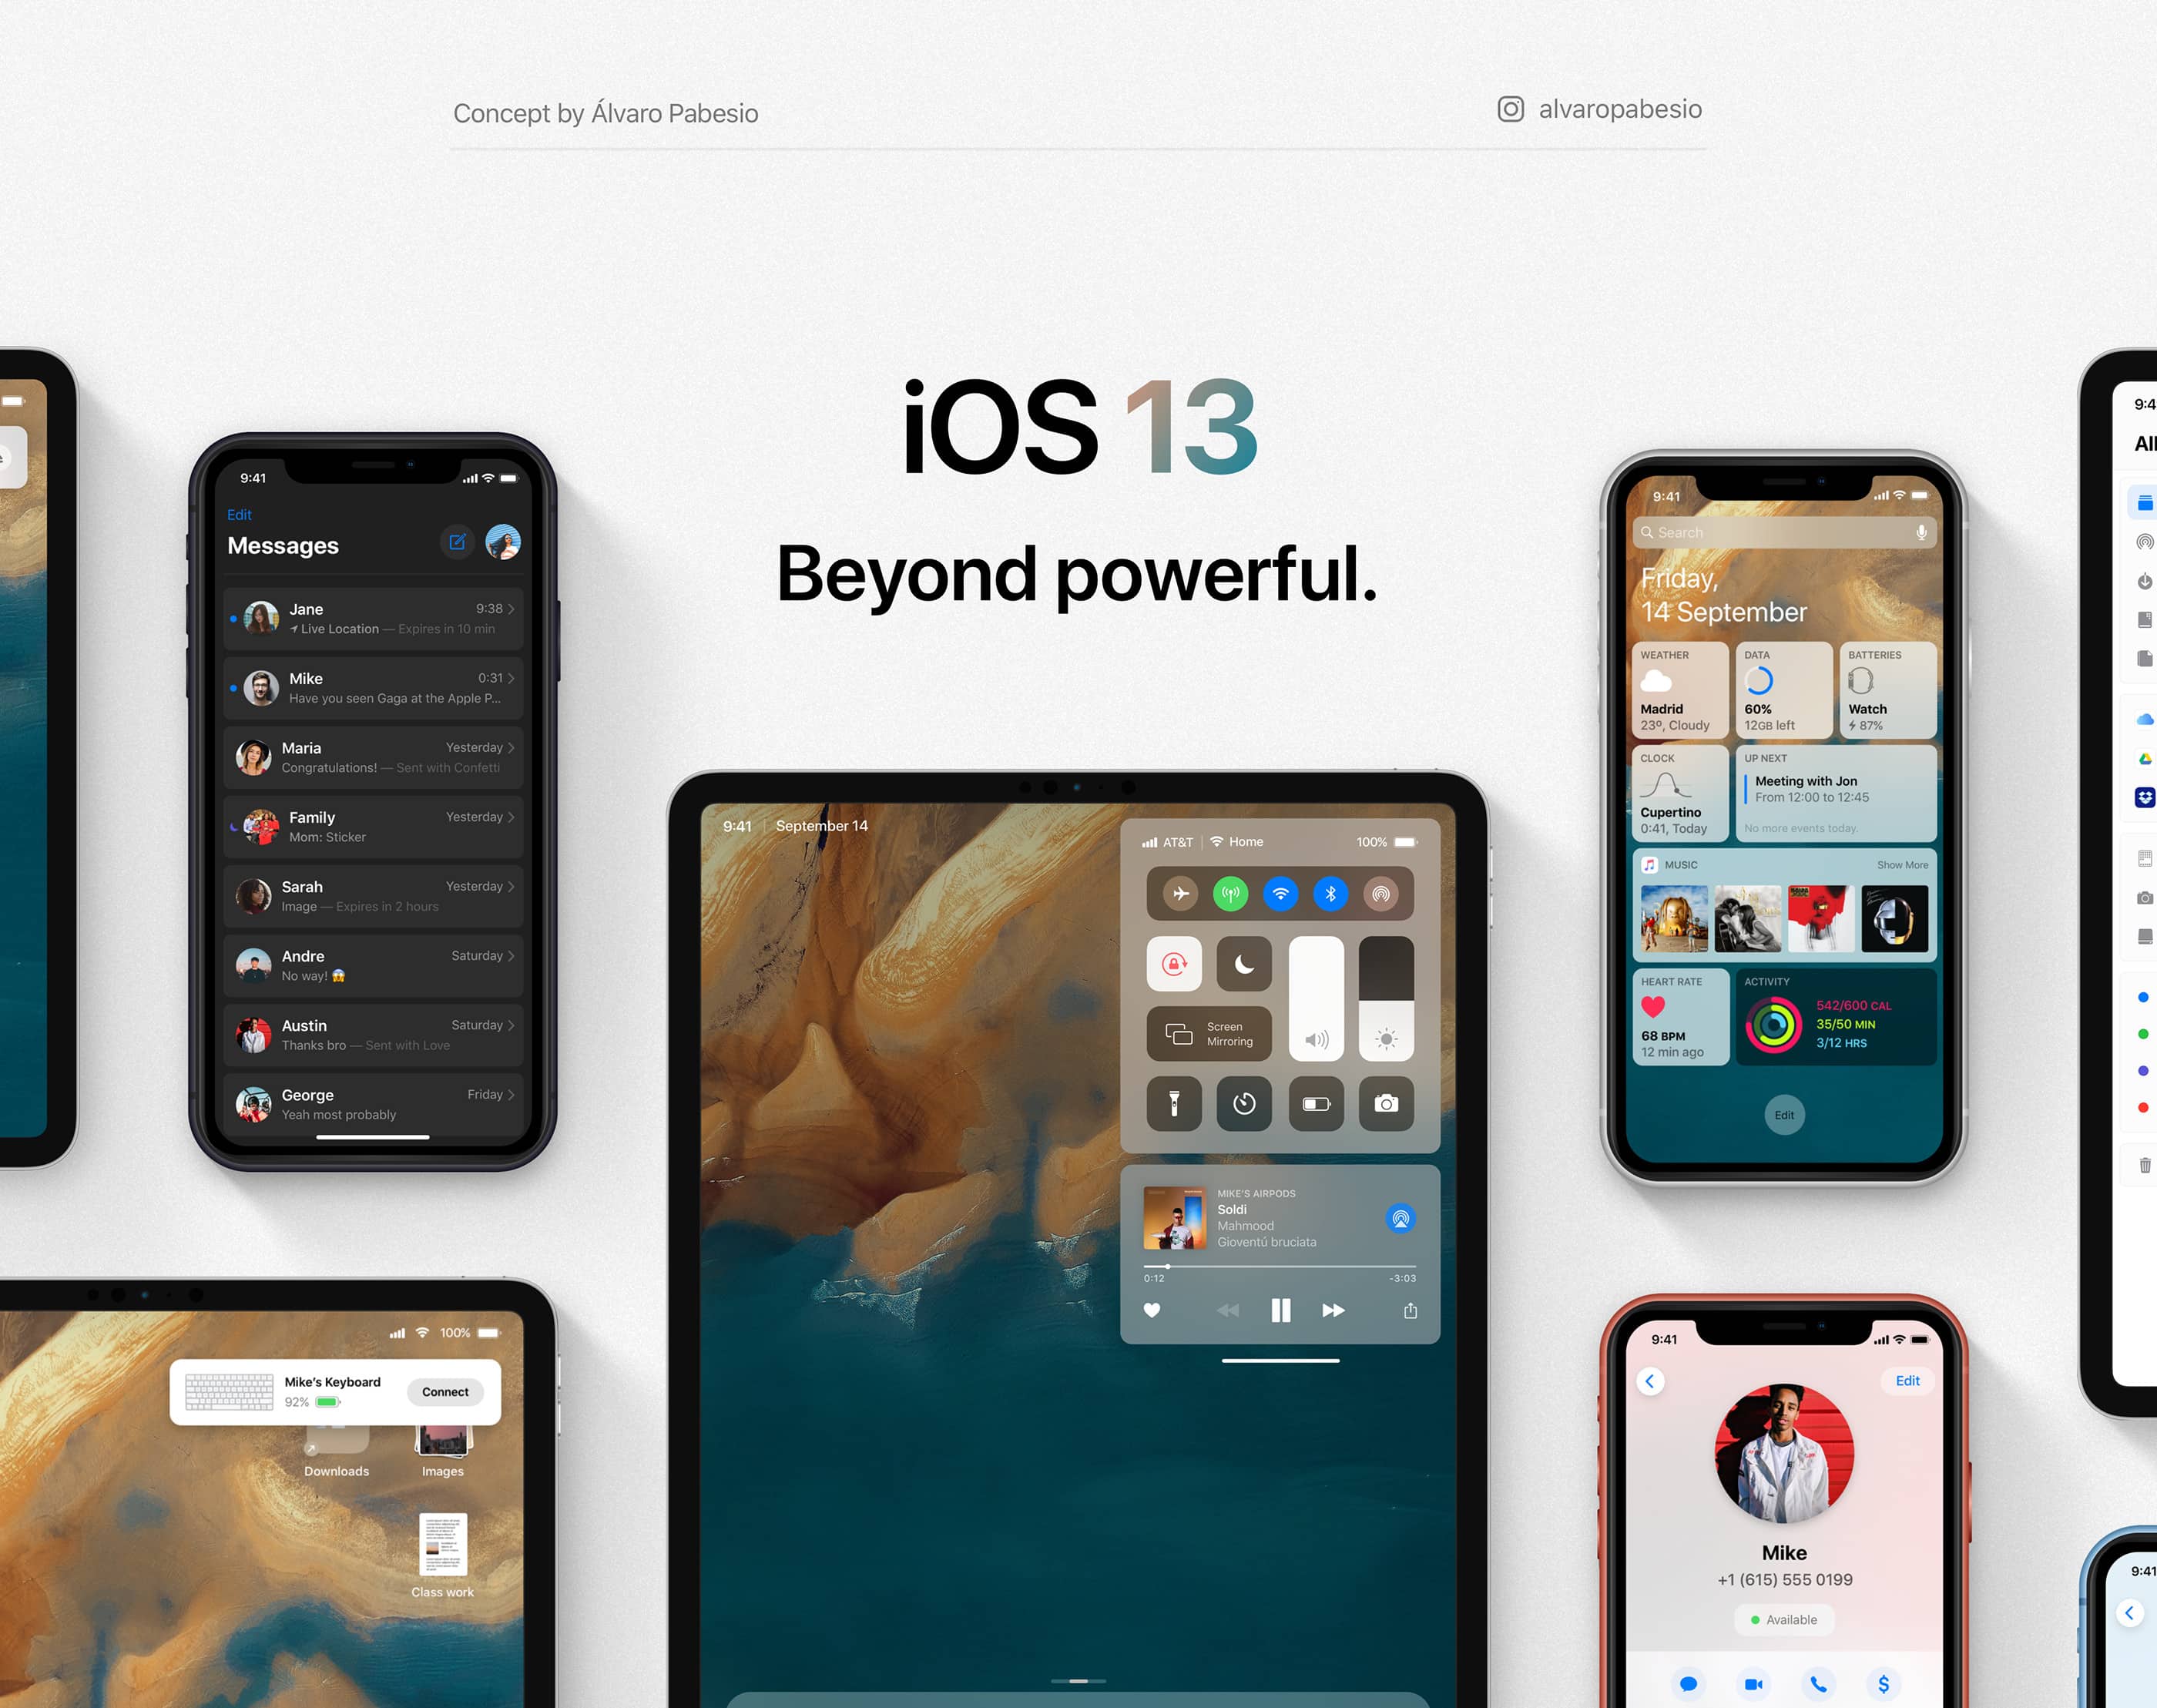 We hope iOS 13 looks a lot like this.